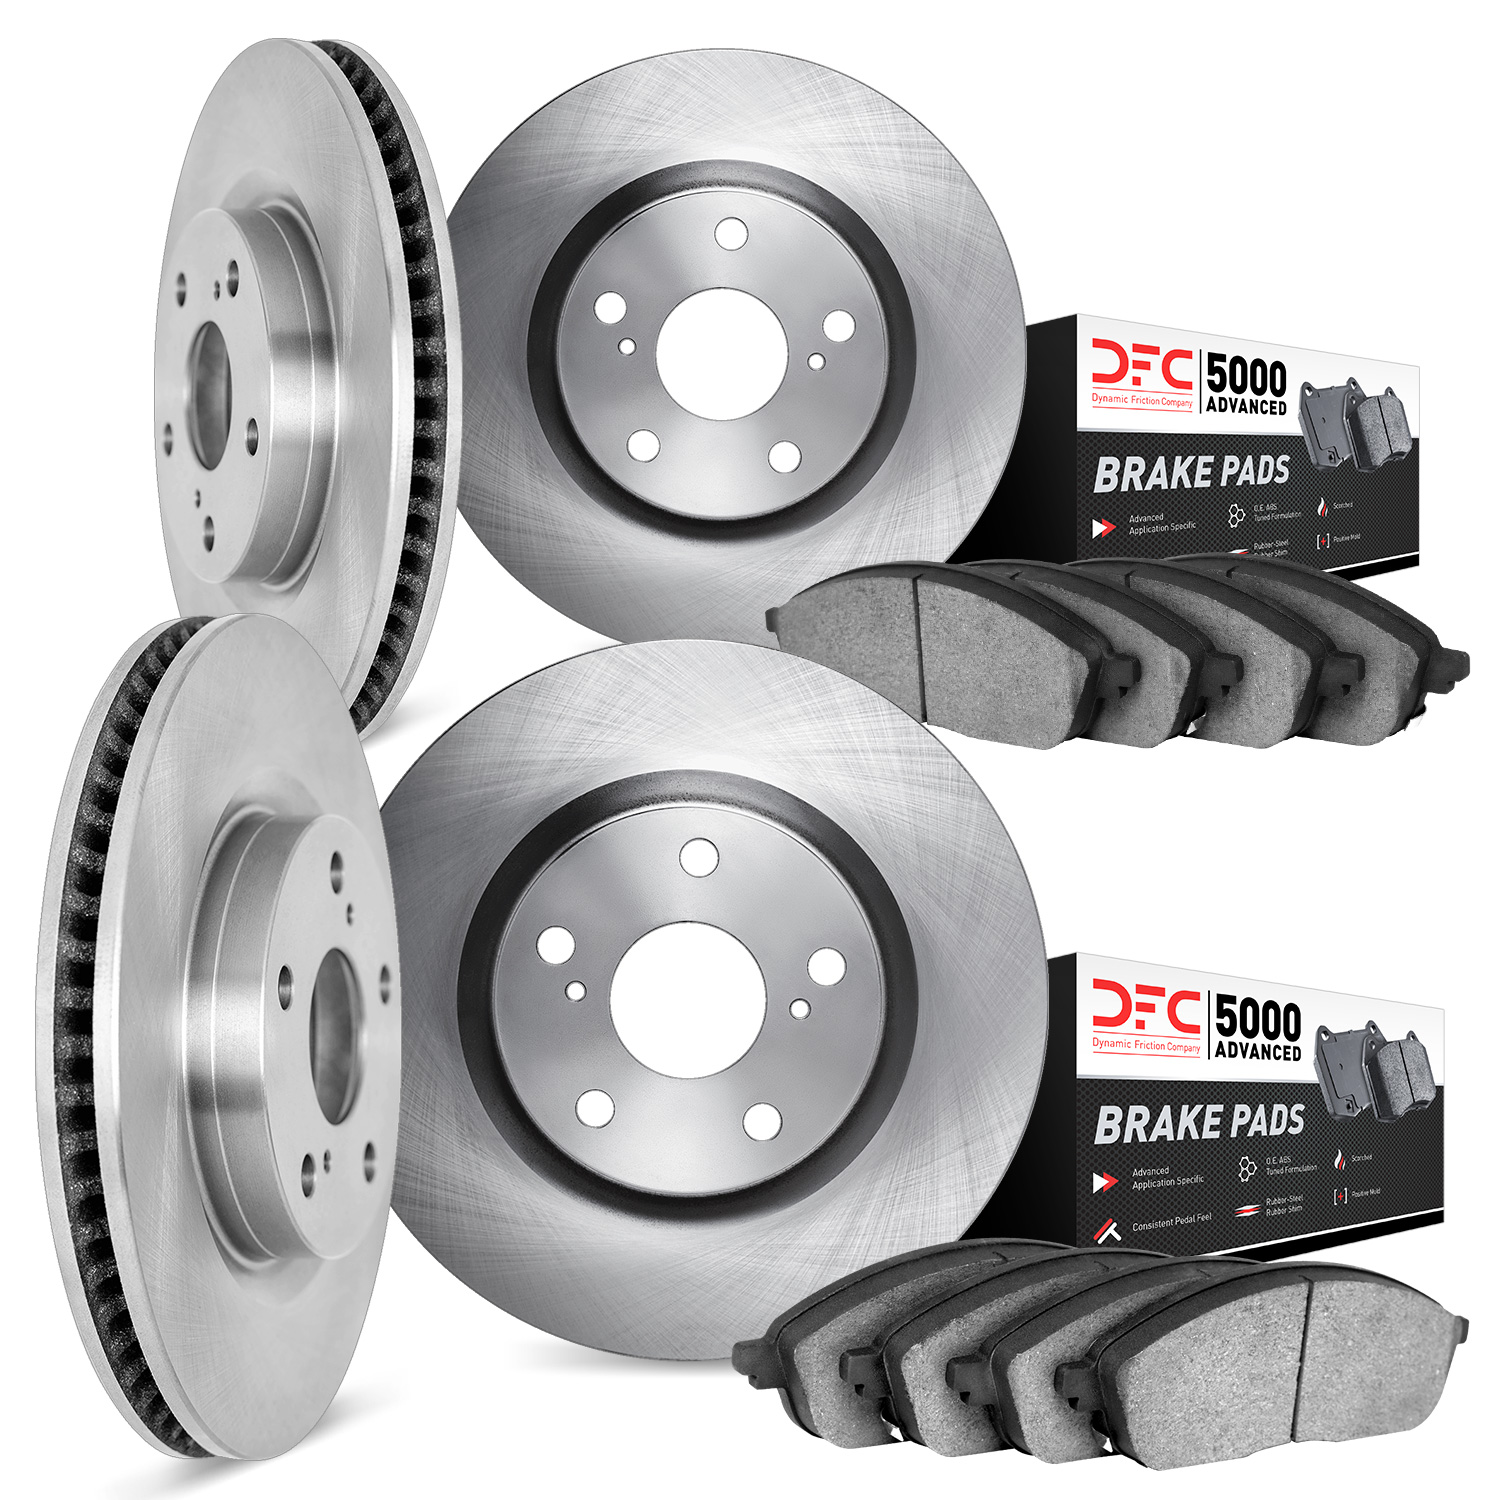 6504-31101 Brake Rotors w/5000 Advanced Brake Pads Kit, 2012-2016 BMW, Position: Front and Rear